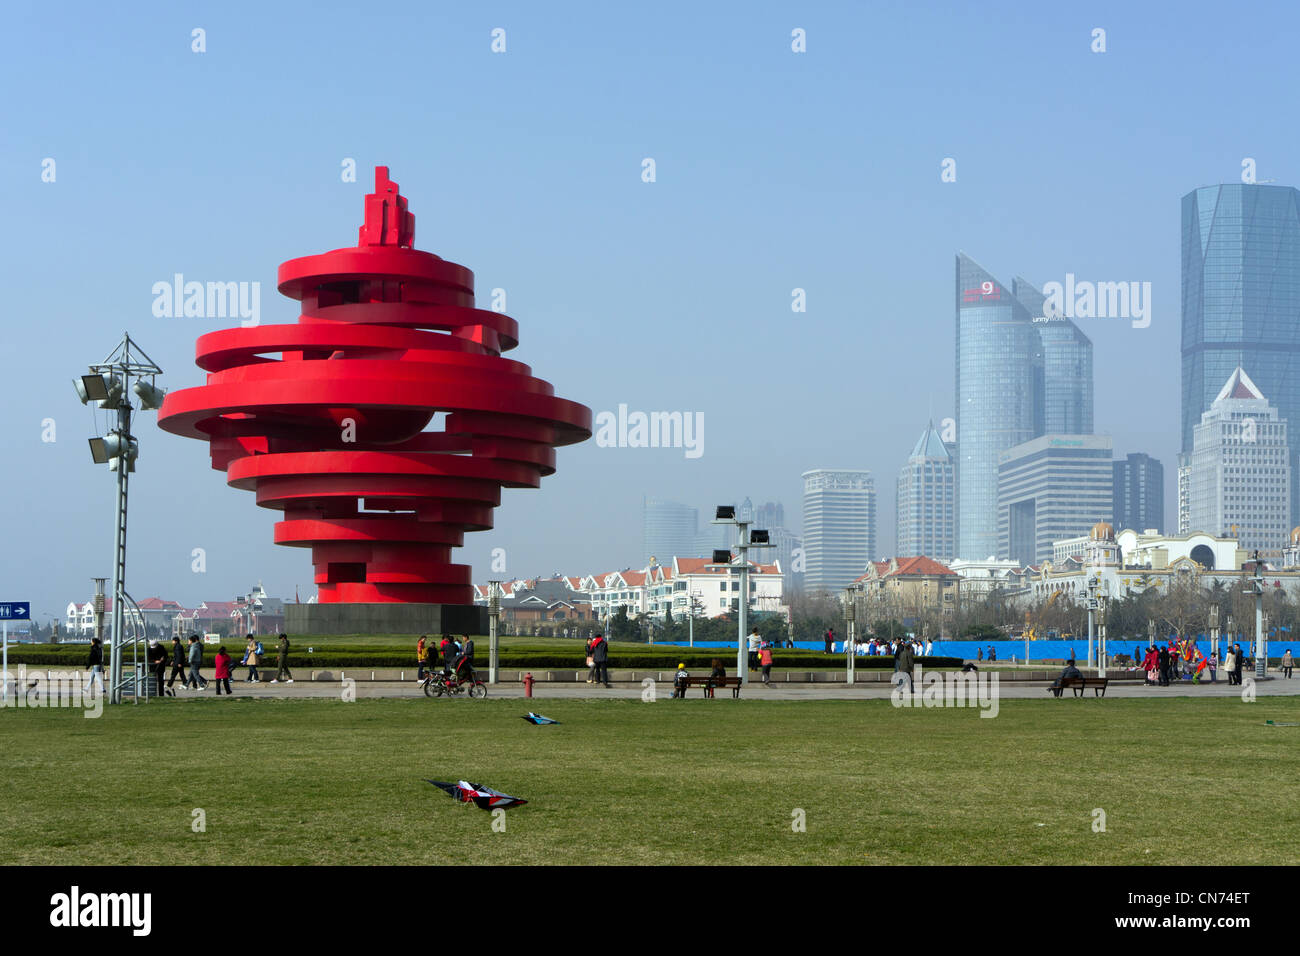 The red May 4th Monument, in the May 4th Square, Qingdao, China Stock Photo